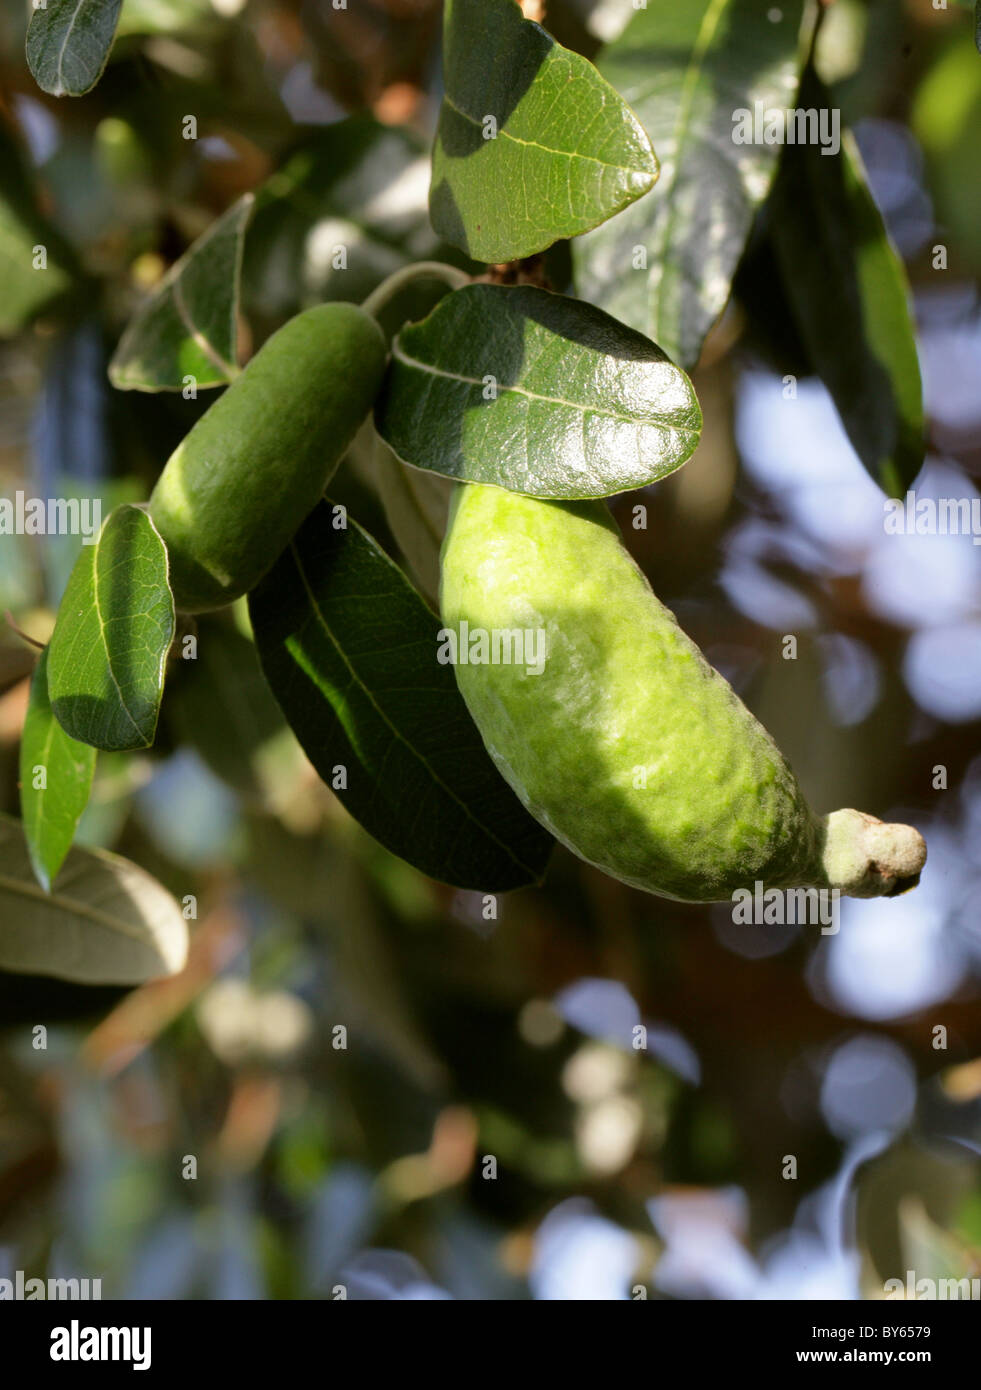 Ananas Guave oder Guavasteen, Acca Sellowiana Syn Feijoa Sellowiana, Myrtaceae. Unreife Früchte. Stockfoto